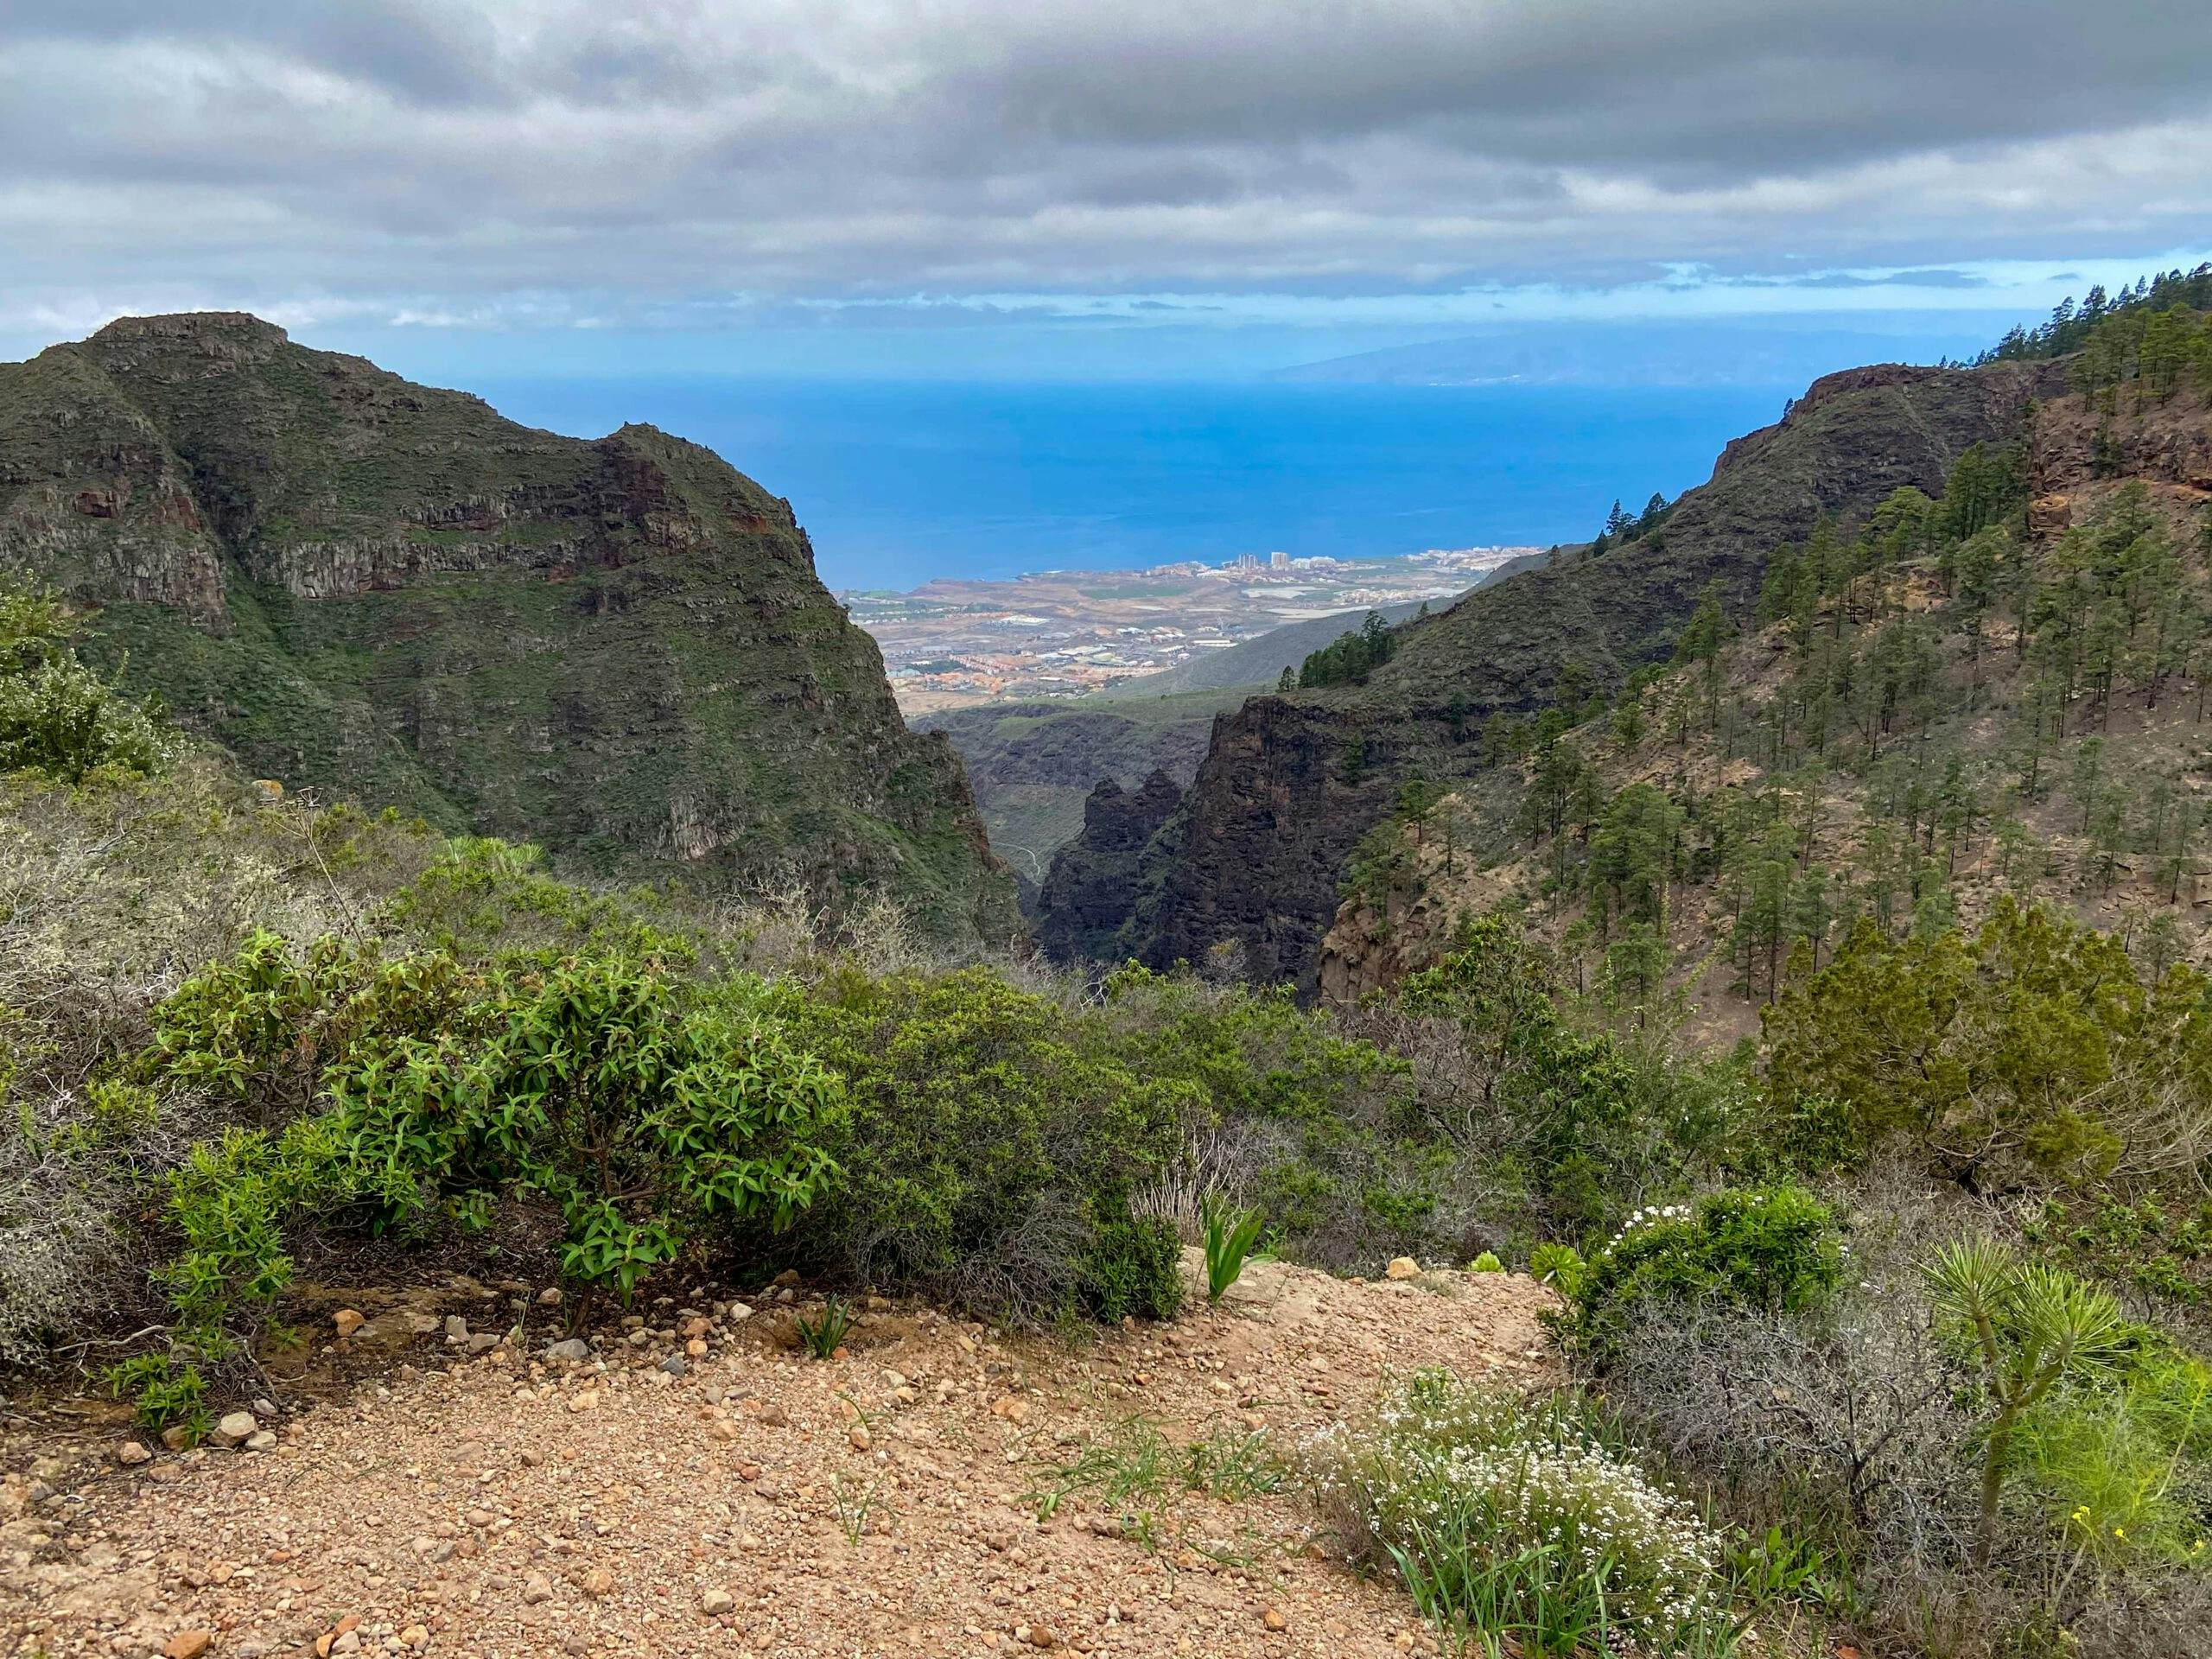 View of the south-west coast of Tenerife and the neighbouring island of La Gomera from the hiking trail